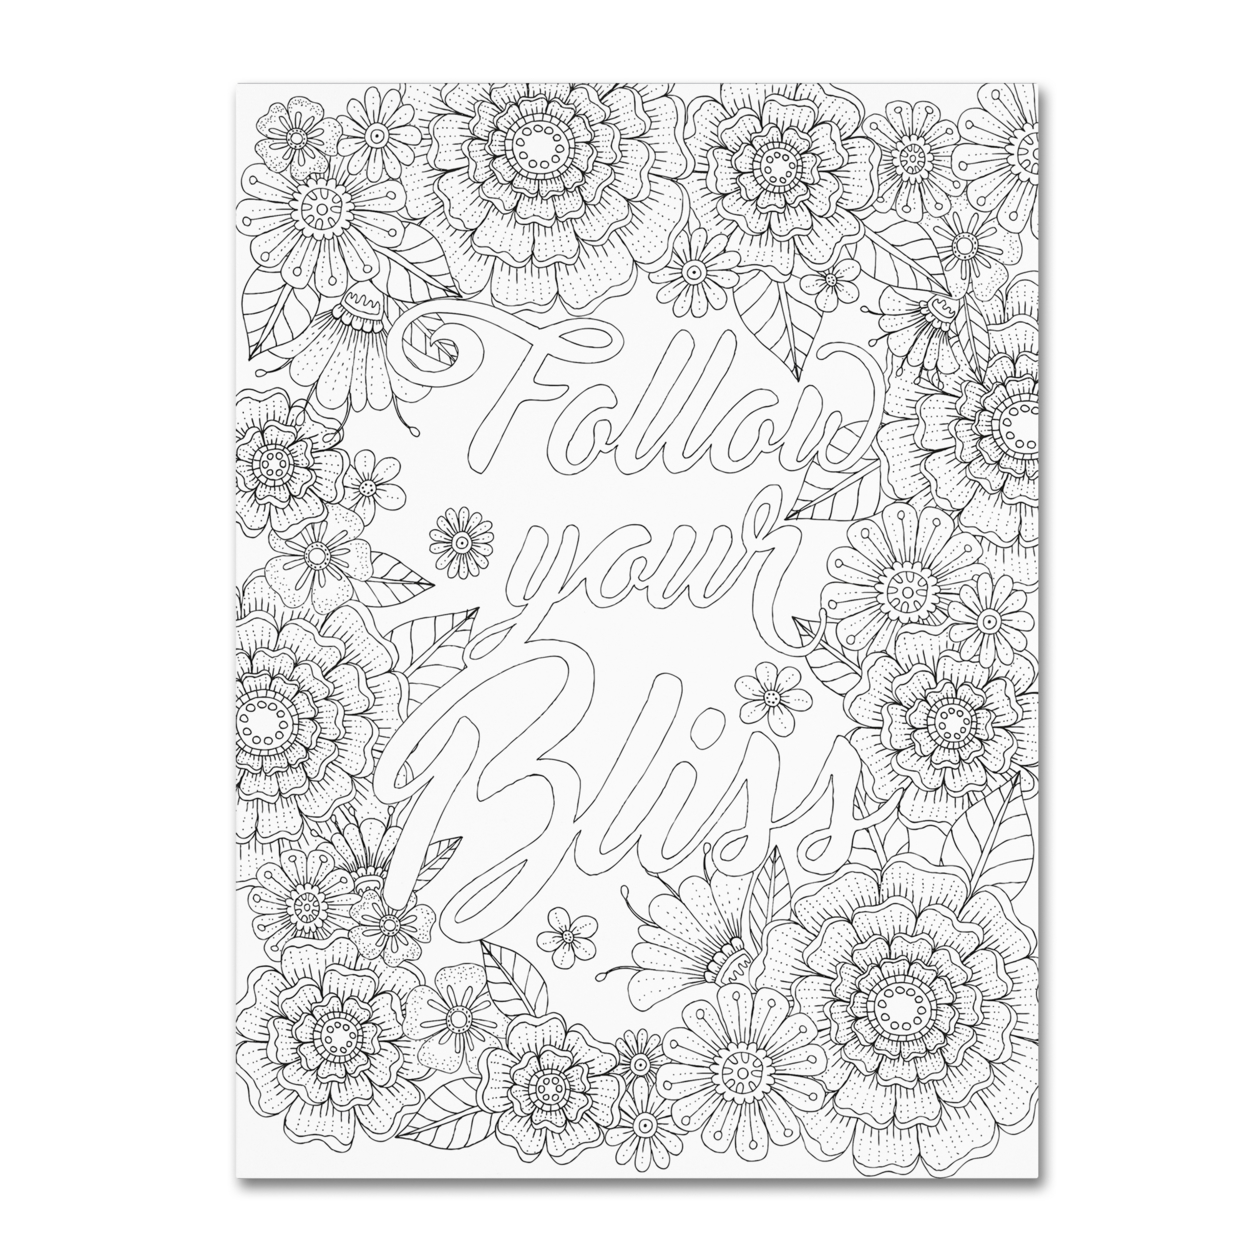 Hello Angel 'Inspirational Quotes 15' Canvas Wall Art 35 X 47 Inches